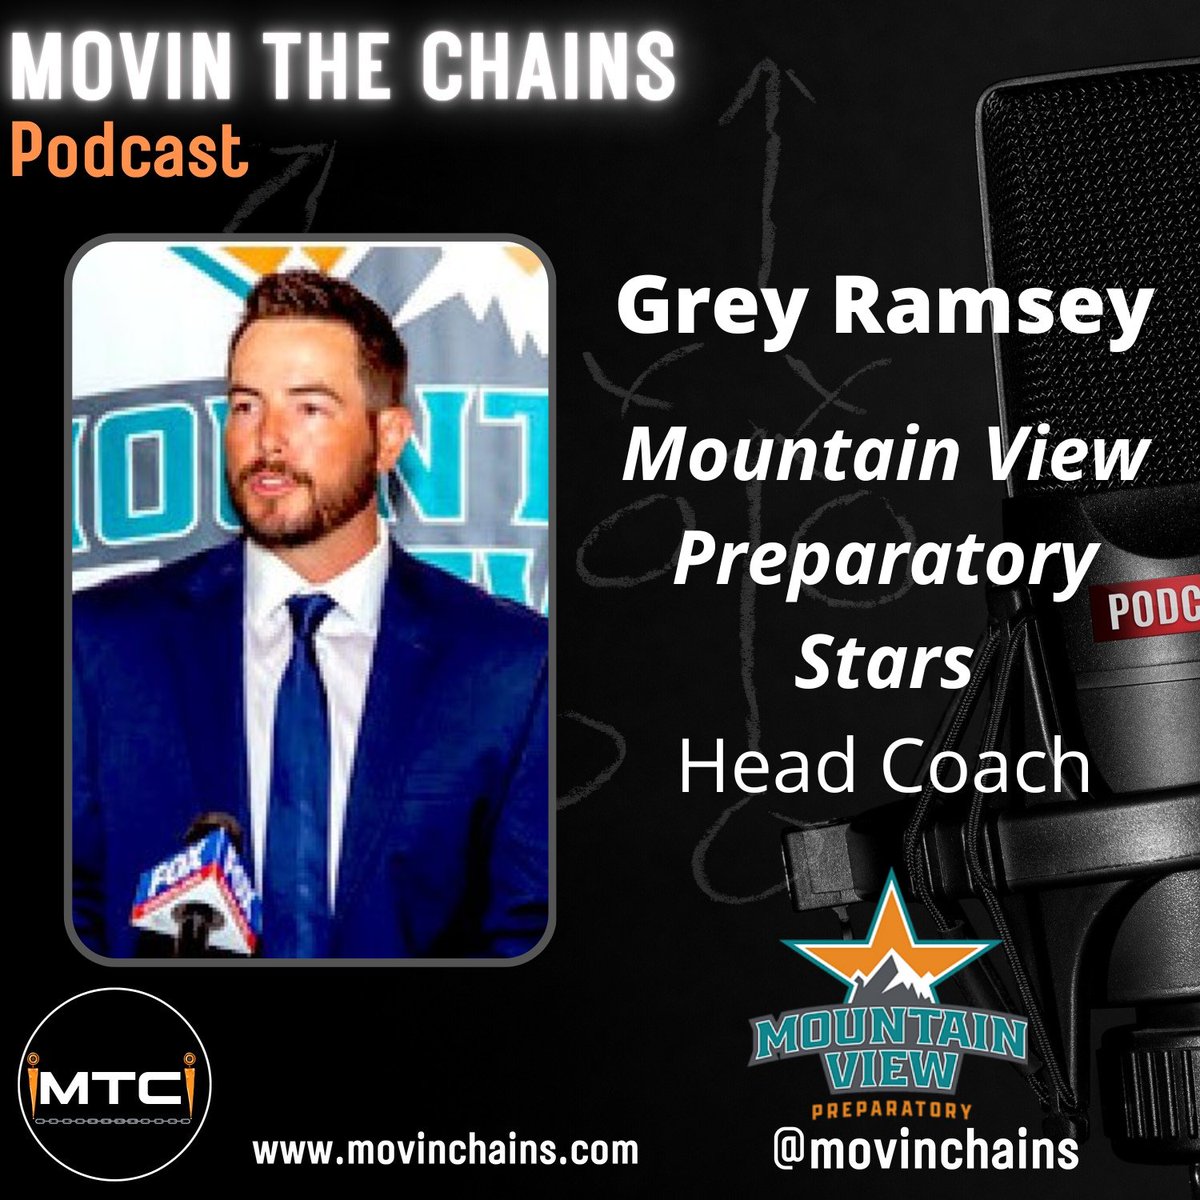 🎙️GREY RAMSEY, MOUNTAIN VIEW PREP STARS' FIRST HC - EXCLUSIVE INTERVIEW WITH MTC 🏈@CoachRamseyMVP discusses starting the program at @MVPFootballSC, building a culture, coaching at a charter school, & more! #schsfb #hsfb 🗓️THURSDAY @7p on Facebook & YouTube🎥📺 ⬇️ 🔗LINK IN BIO